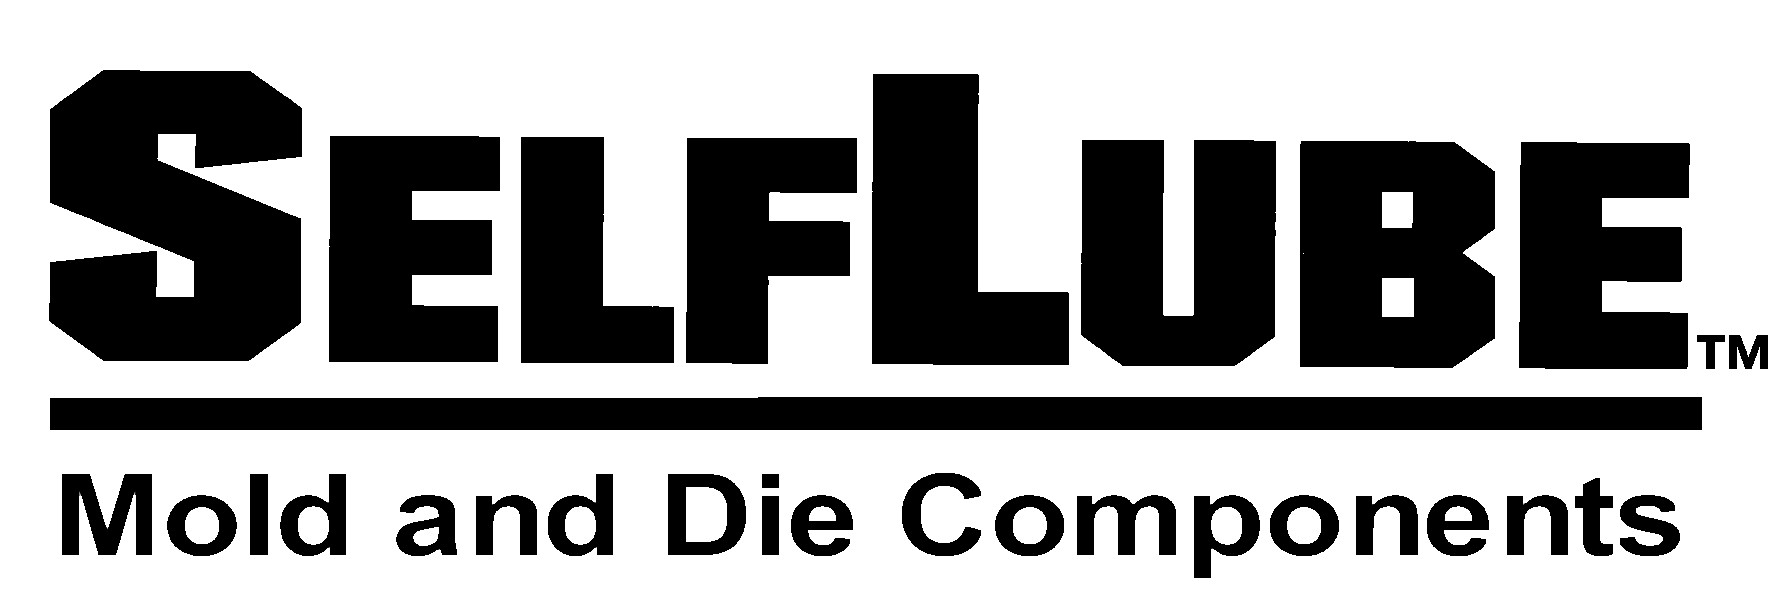 Leading U.S. manufacturer of mold and die components